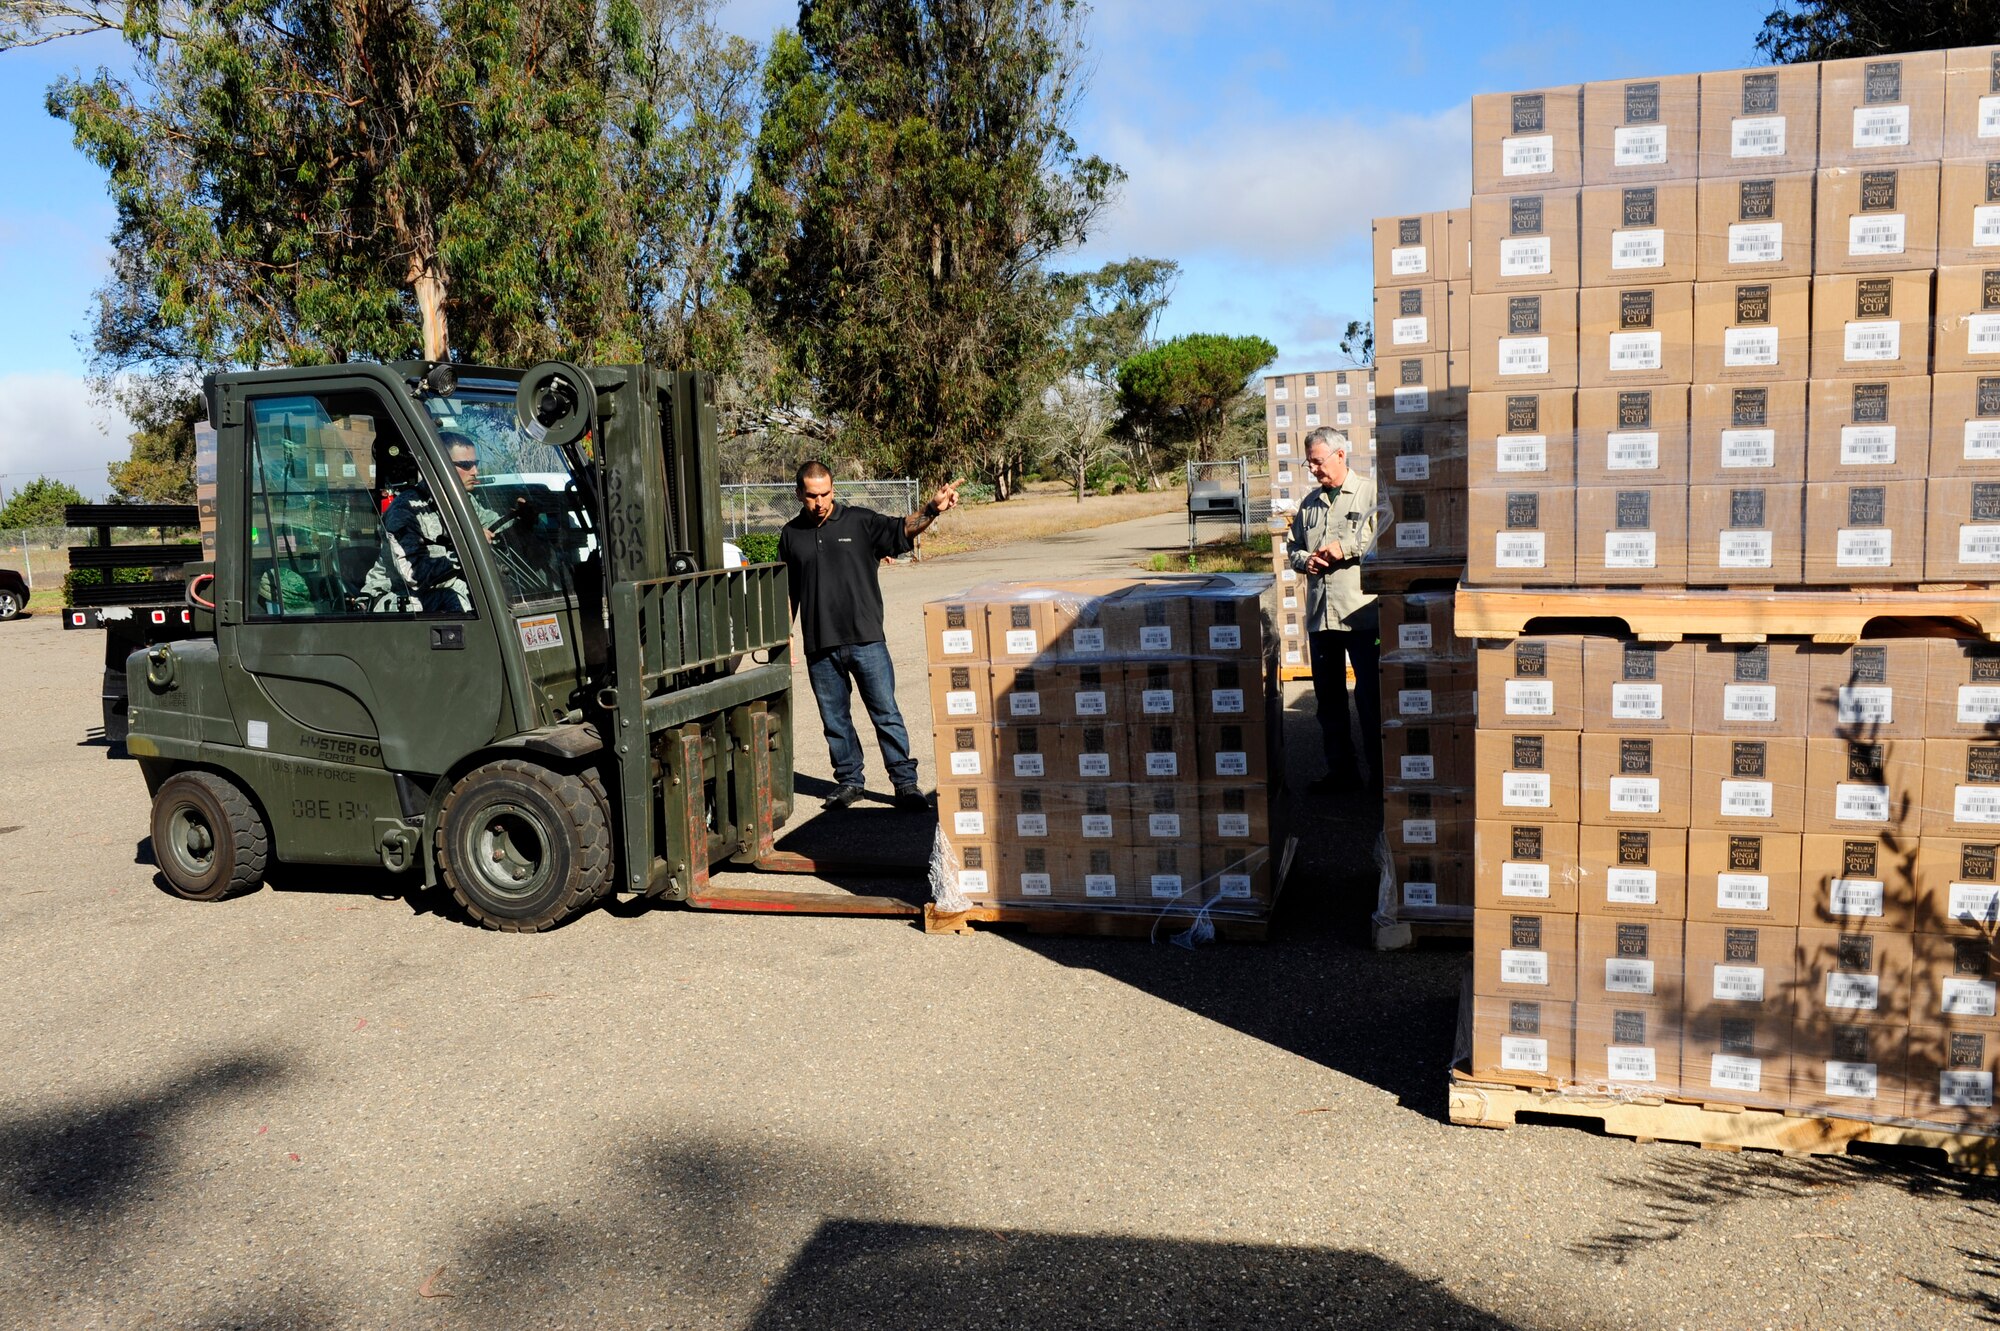 The 30th Logistics Readiness Squadron personnel distribute coffee during Operations Coffee Drop, Aug. 13, 2015, Vandenberg Air Force Base, Calif. The 30th SW chapel distributed 400,000 K-Cups to Team Vandenberg to improve morale and welfare. (U.S. Air Force photo by Staff Sgt. Jim Araos/Released)